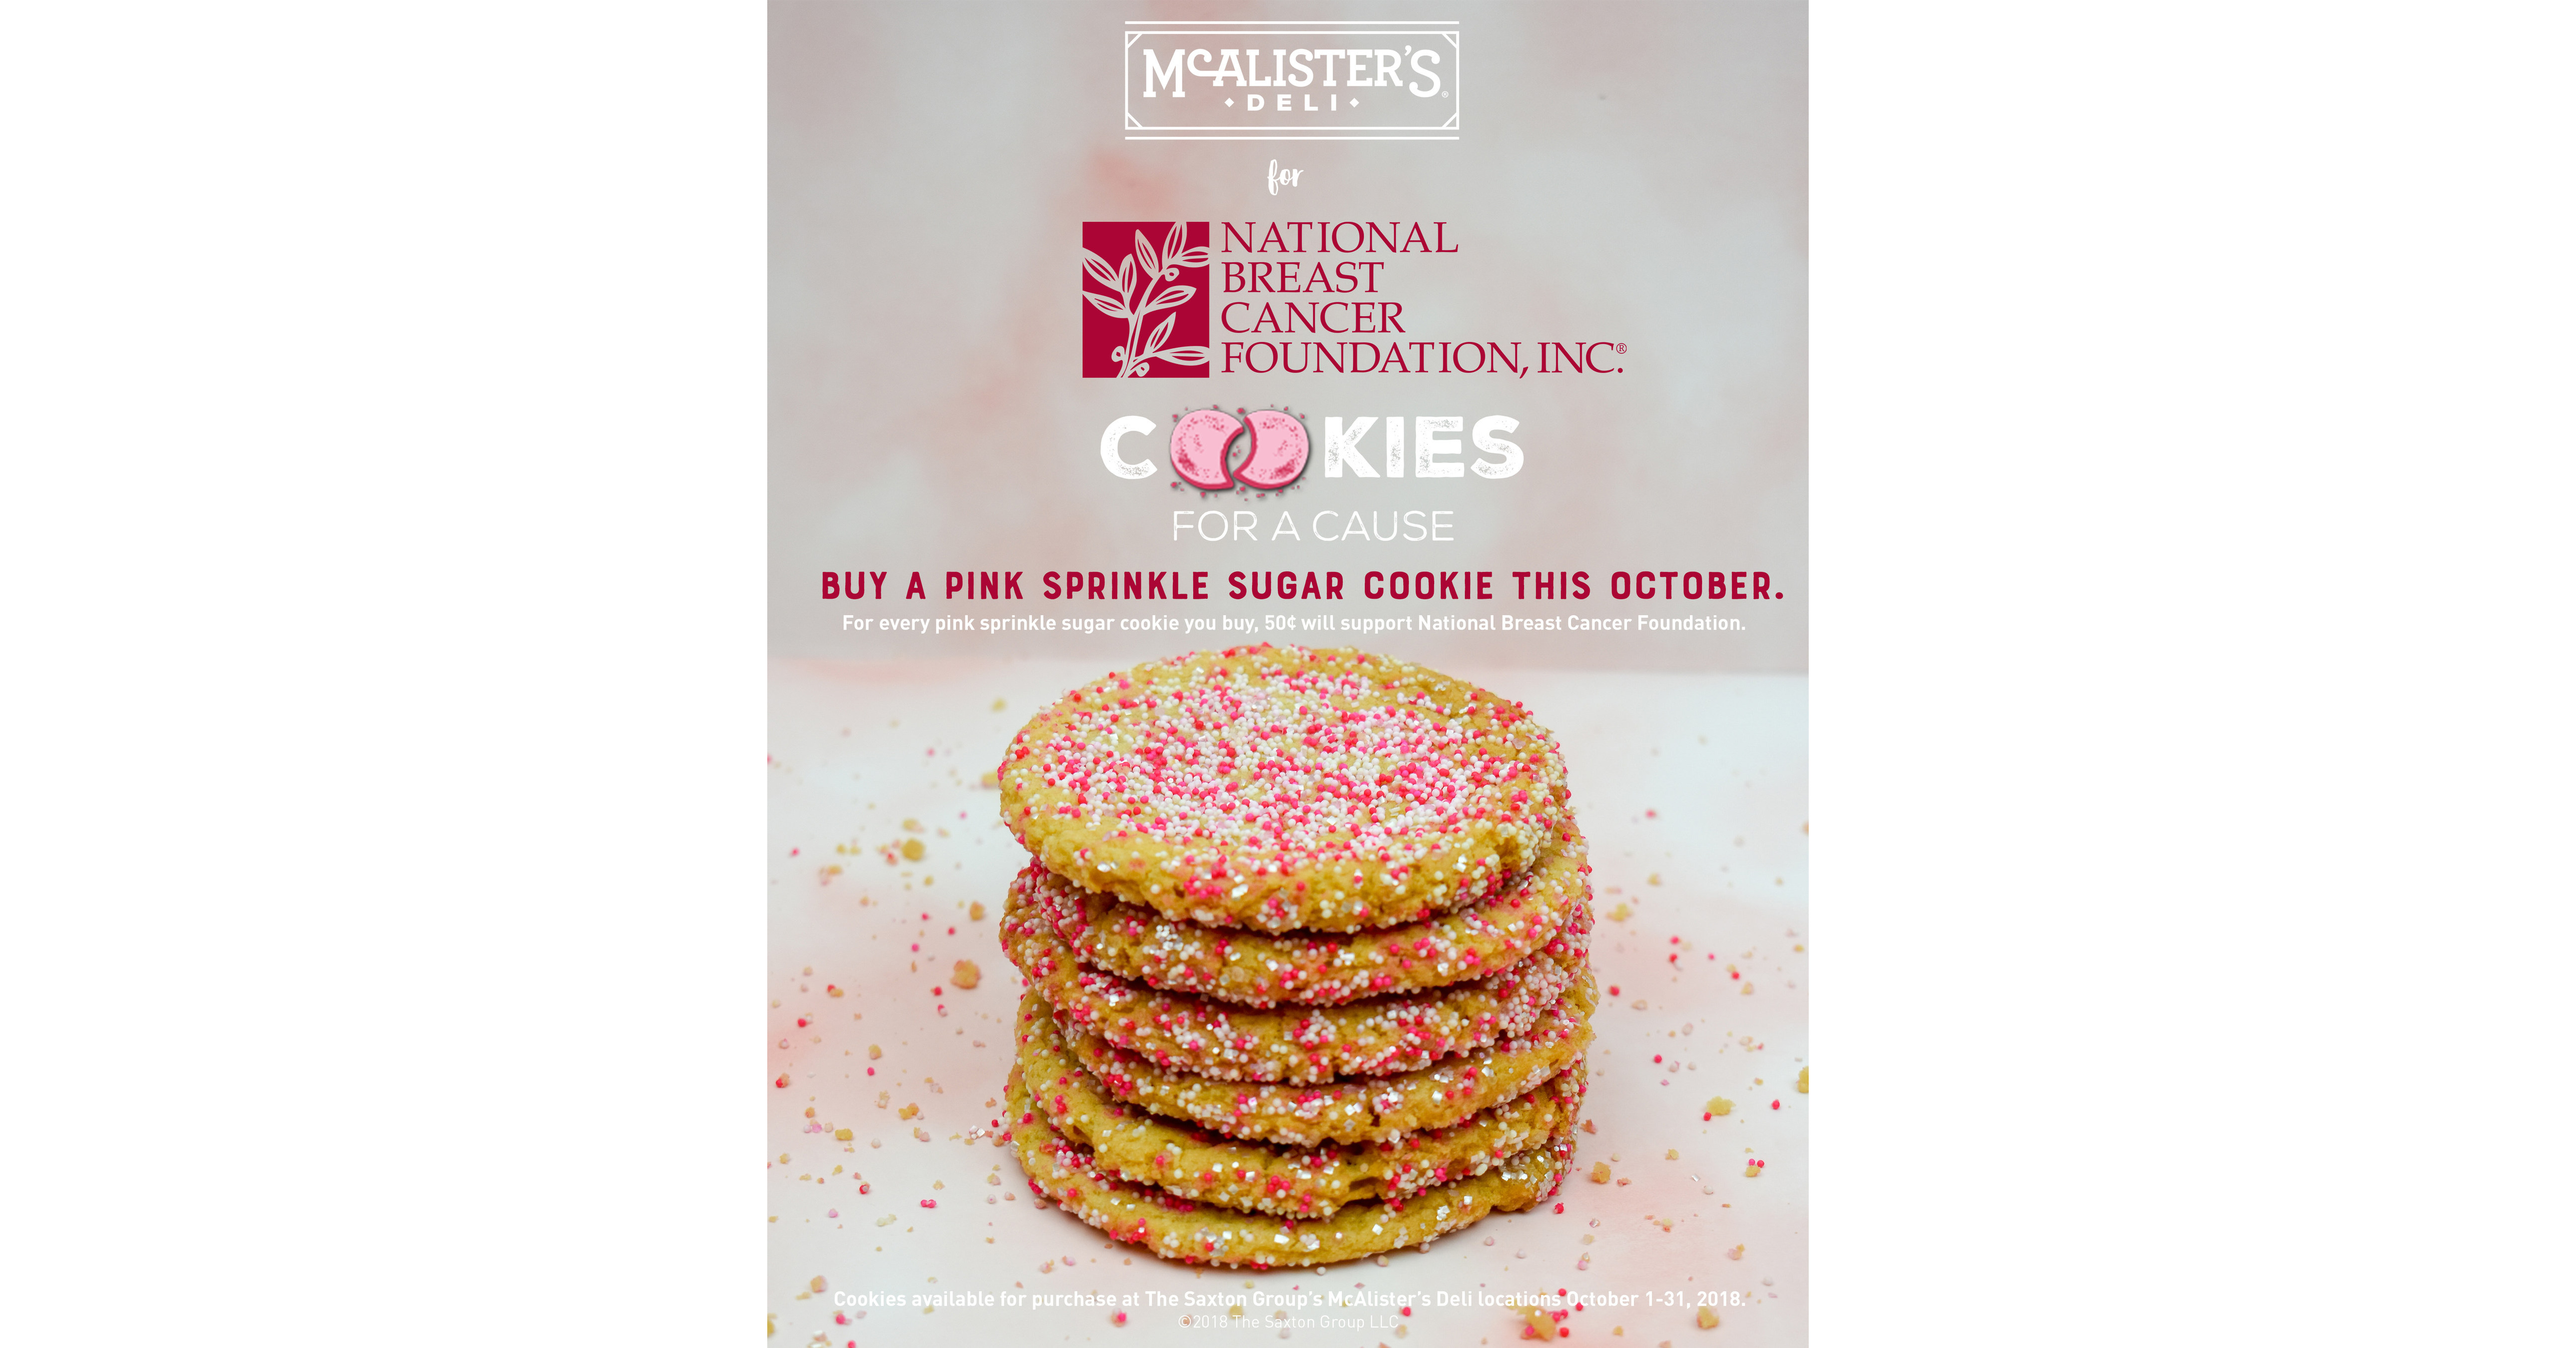 https://mma.prnewswire.com/media/751012/The_Saxton_Group_McAlisters_Deli_NBCF_Cookies.jpg?p=facebook